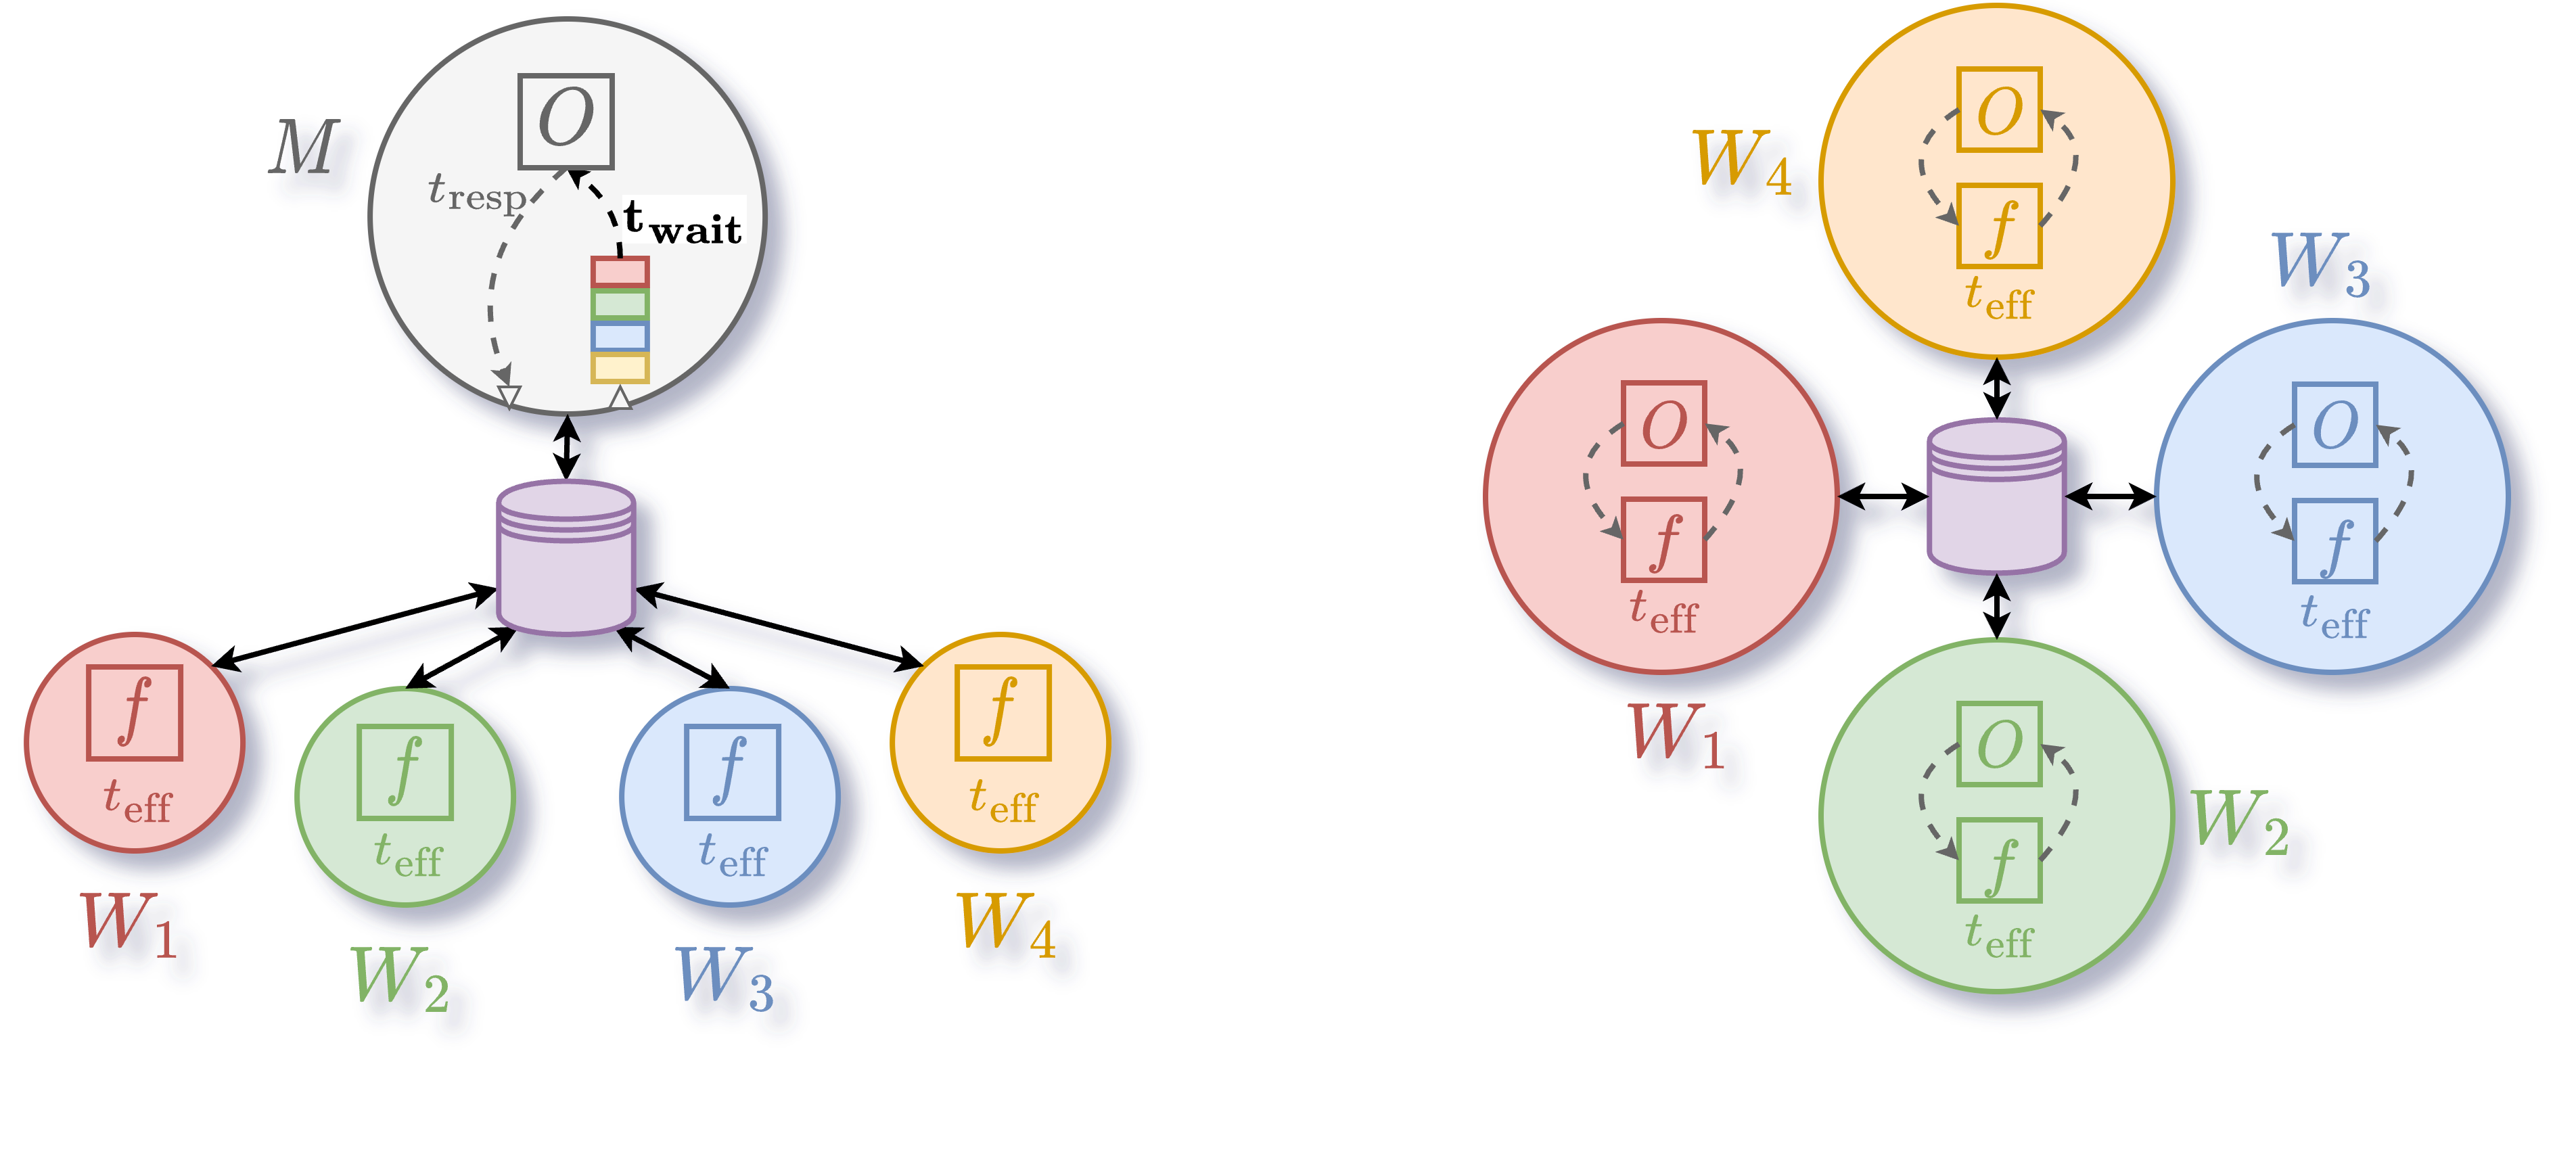 Centralized (left) and Distributed (right) architectures